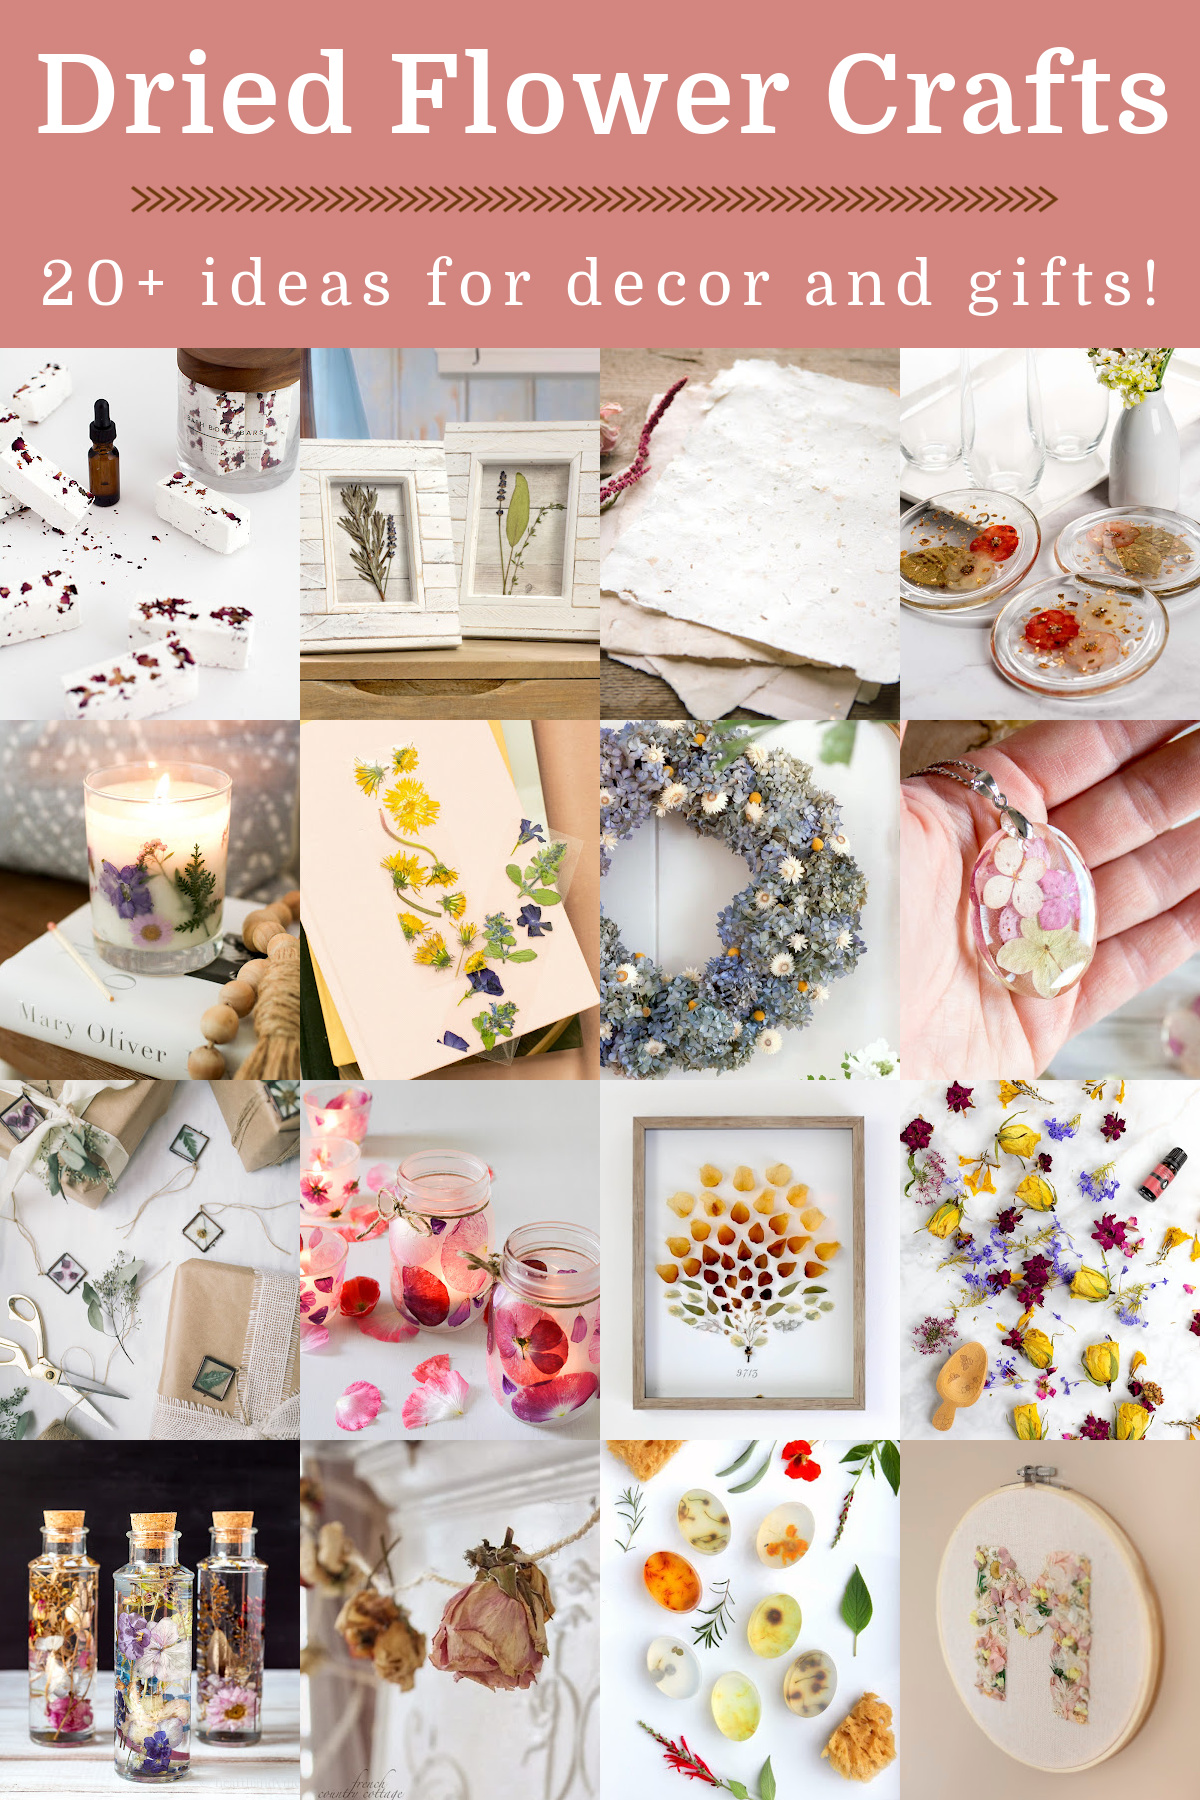 Dried Flower Crafts for decor or gifts